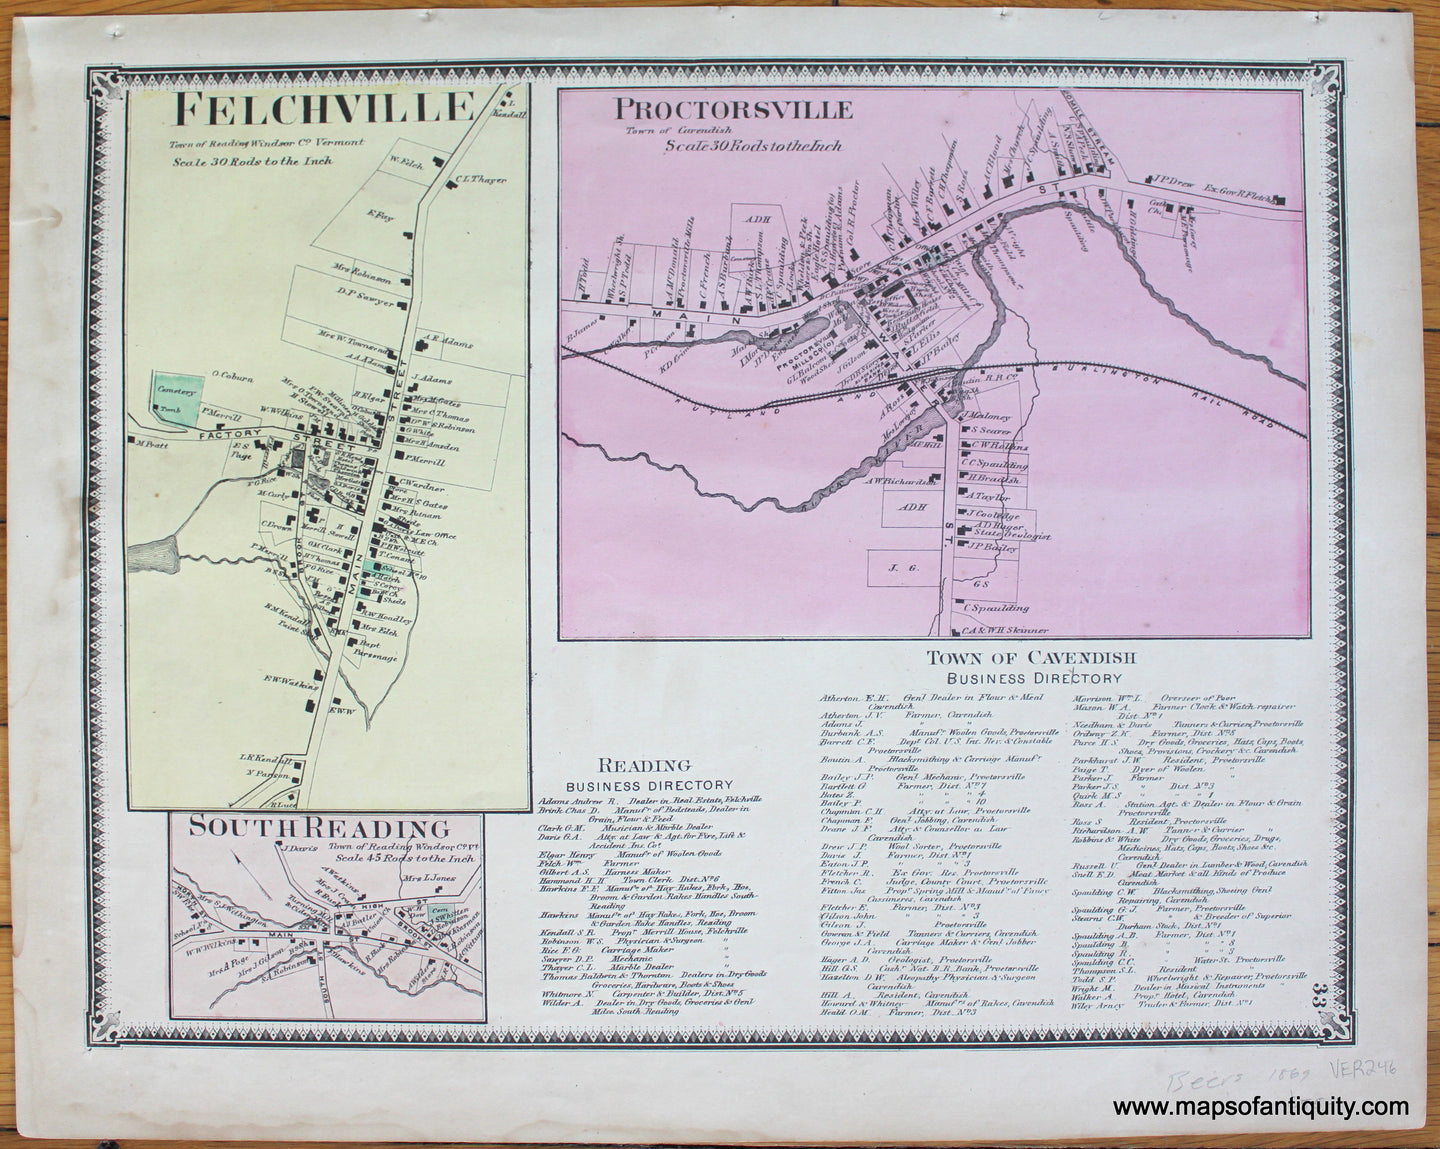 Antique-Map-Vermont-VT-Windsor-County-Town-Felchville-Proctorsville-South-Reading-Beers-1869-1860s-1800s-19th-Century-Maps-of-Antiquity